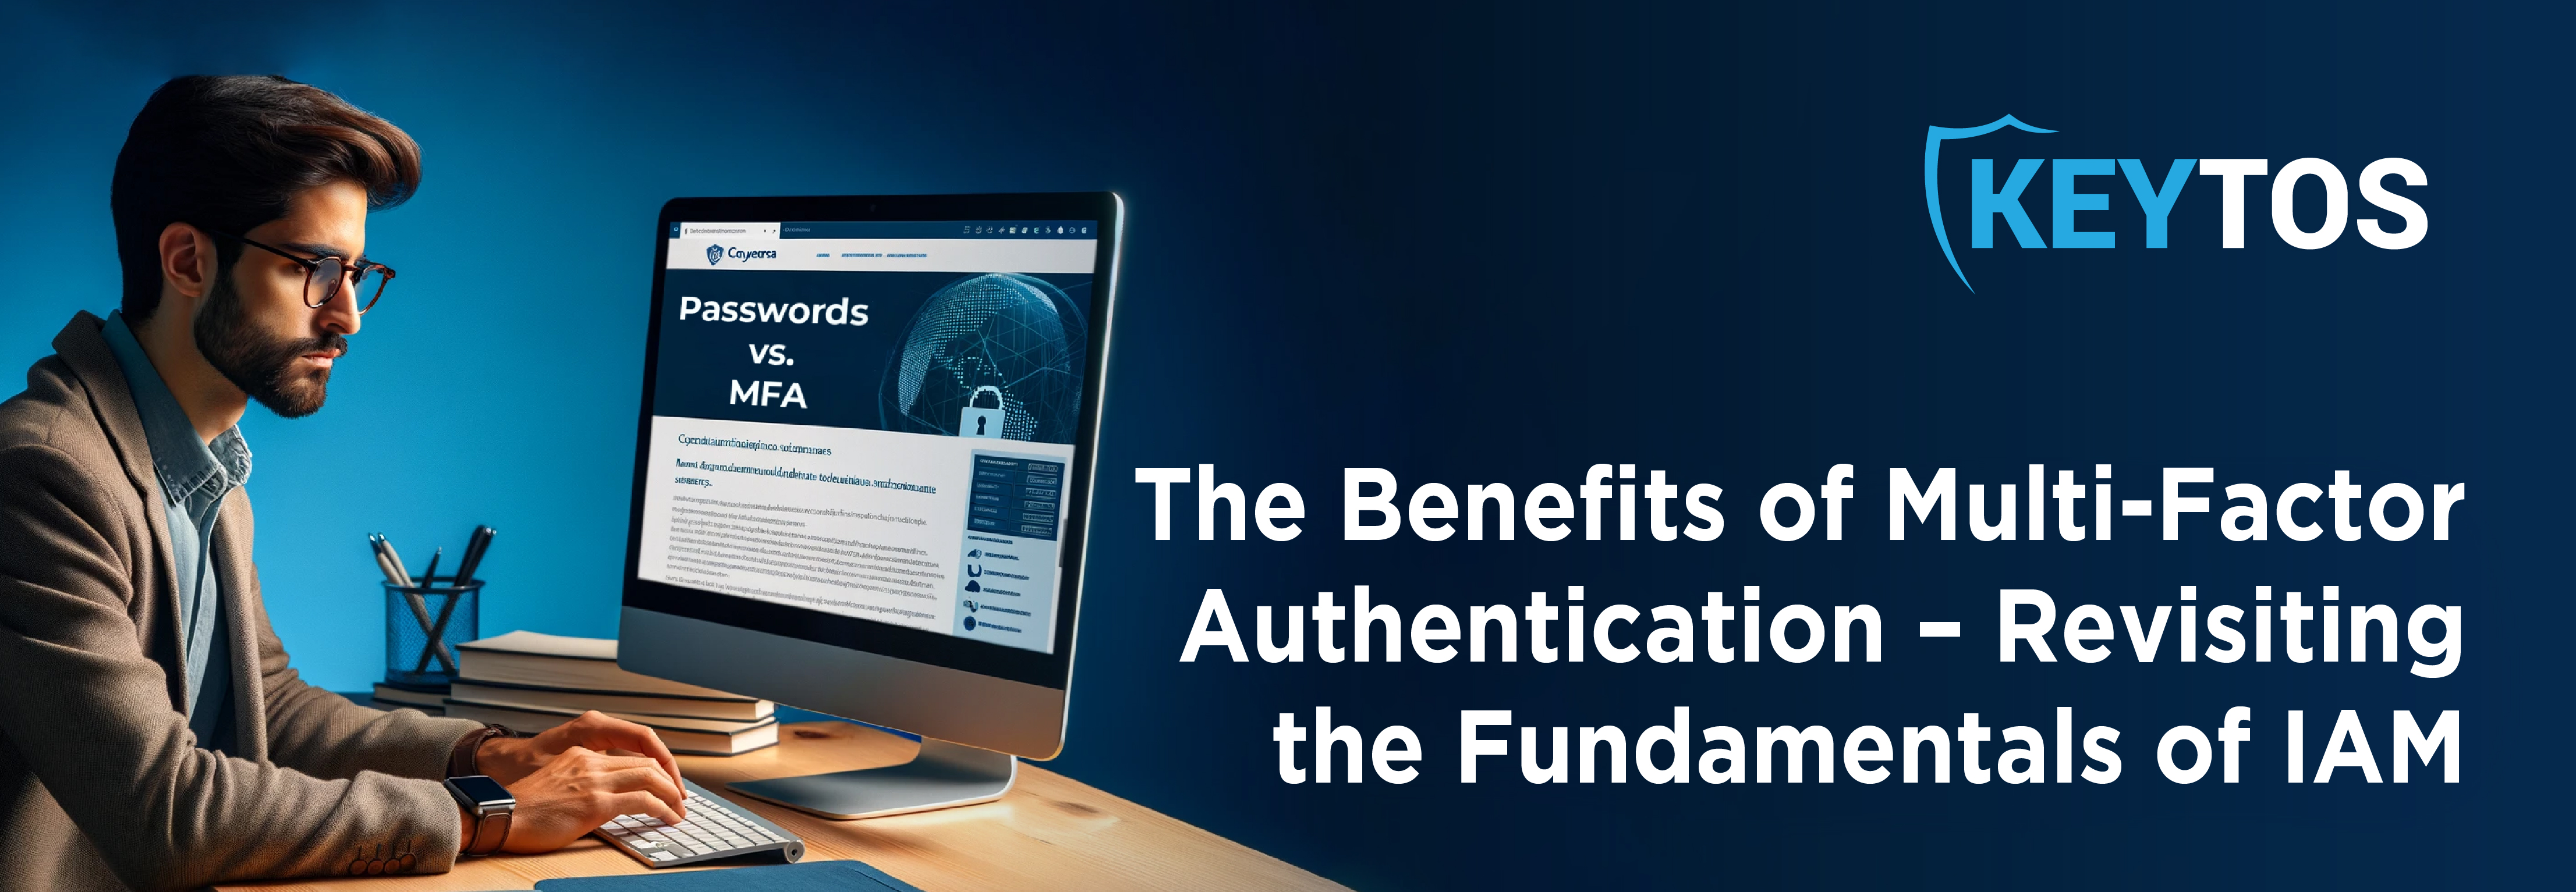 What are the benefits of multi factor authentication (MFA)?